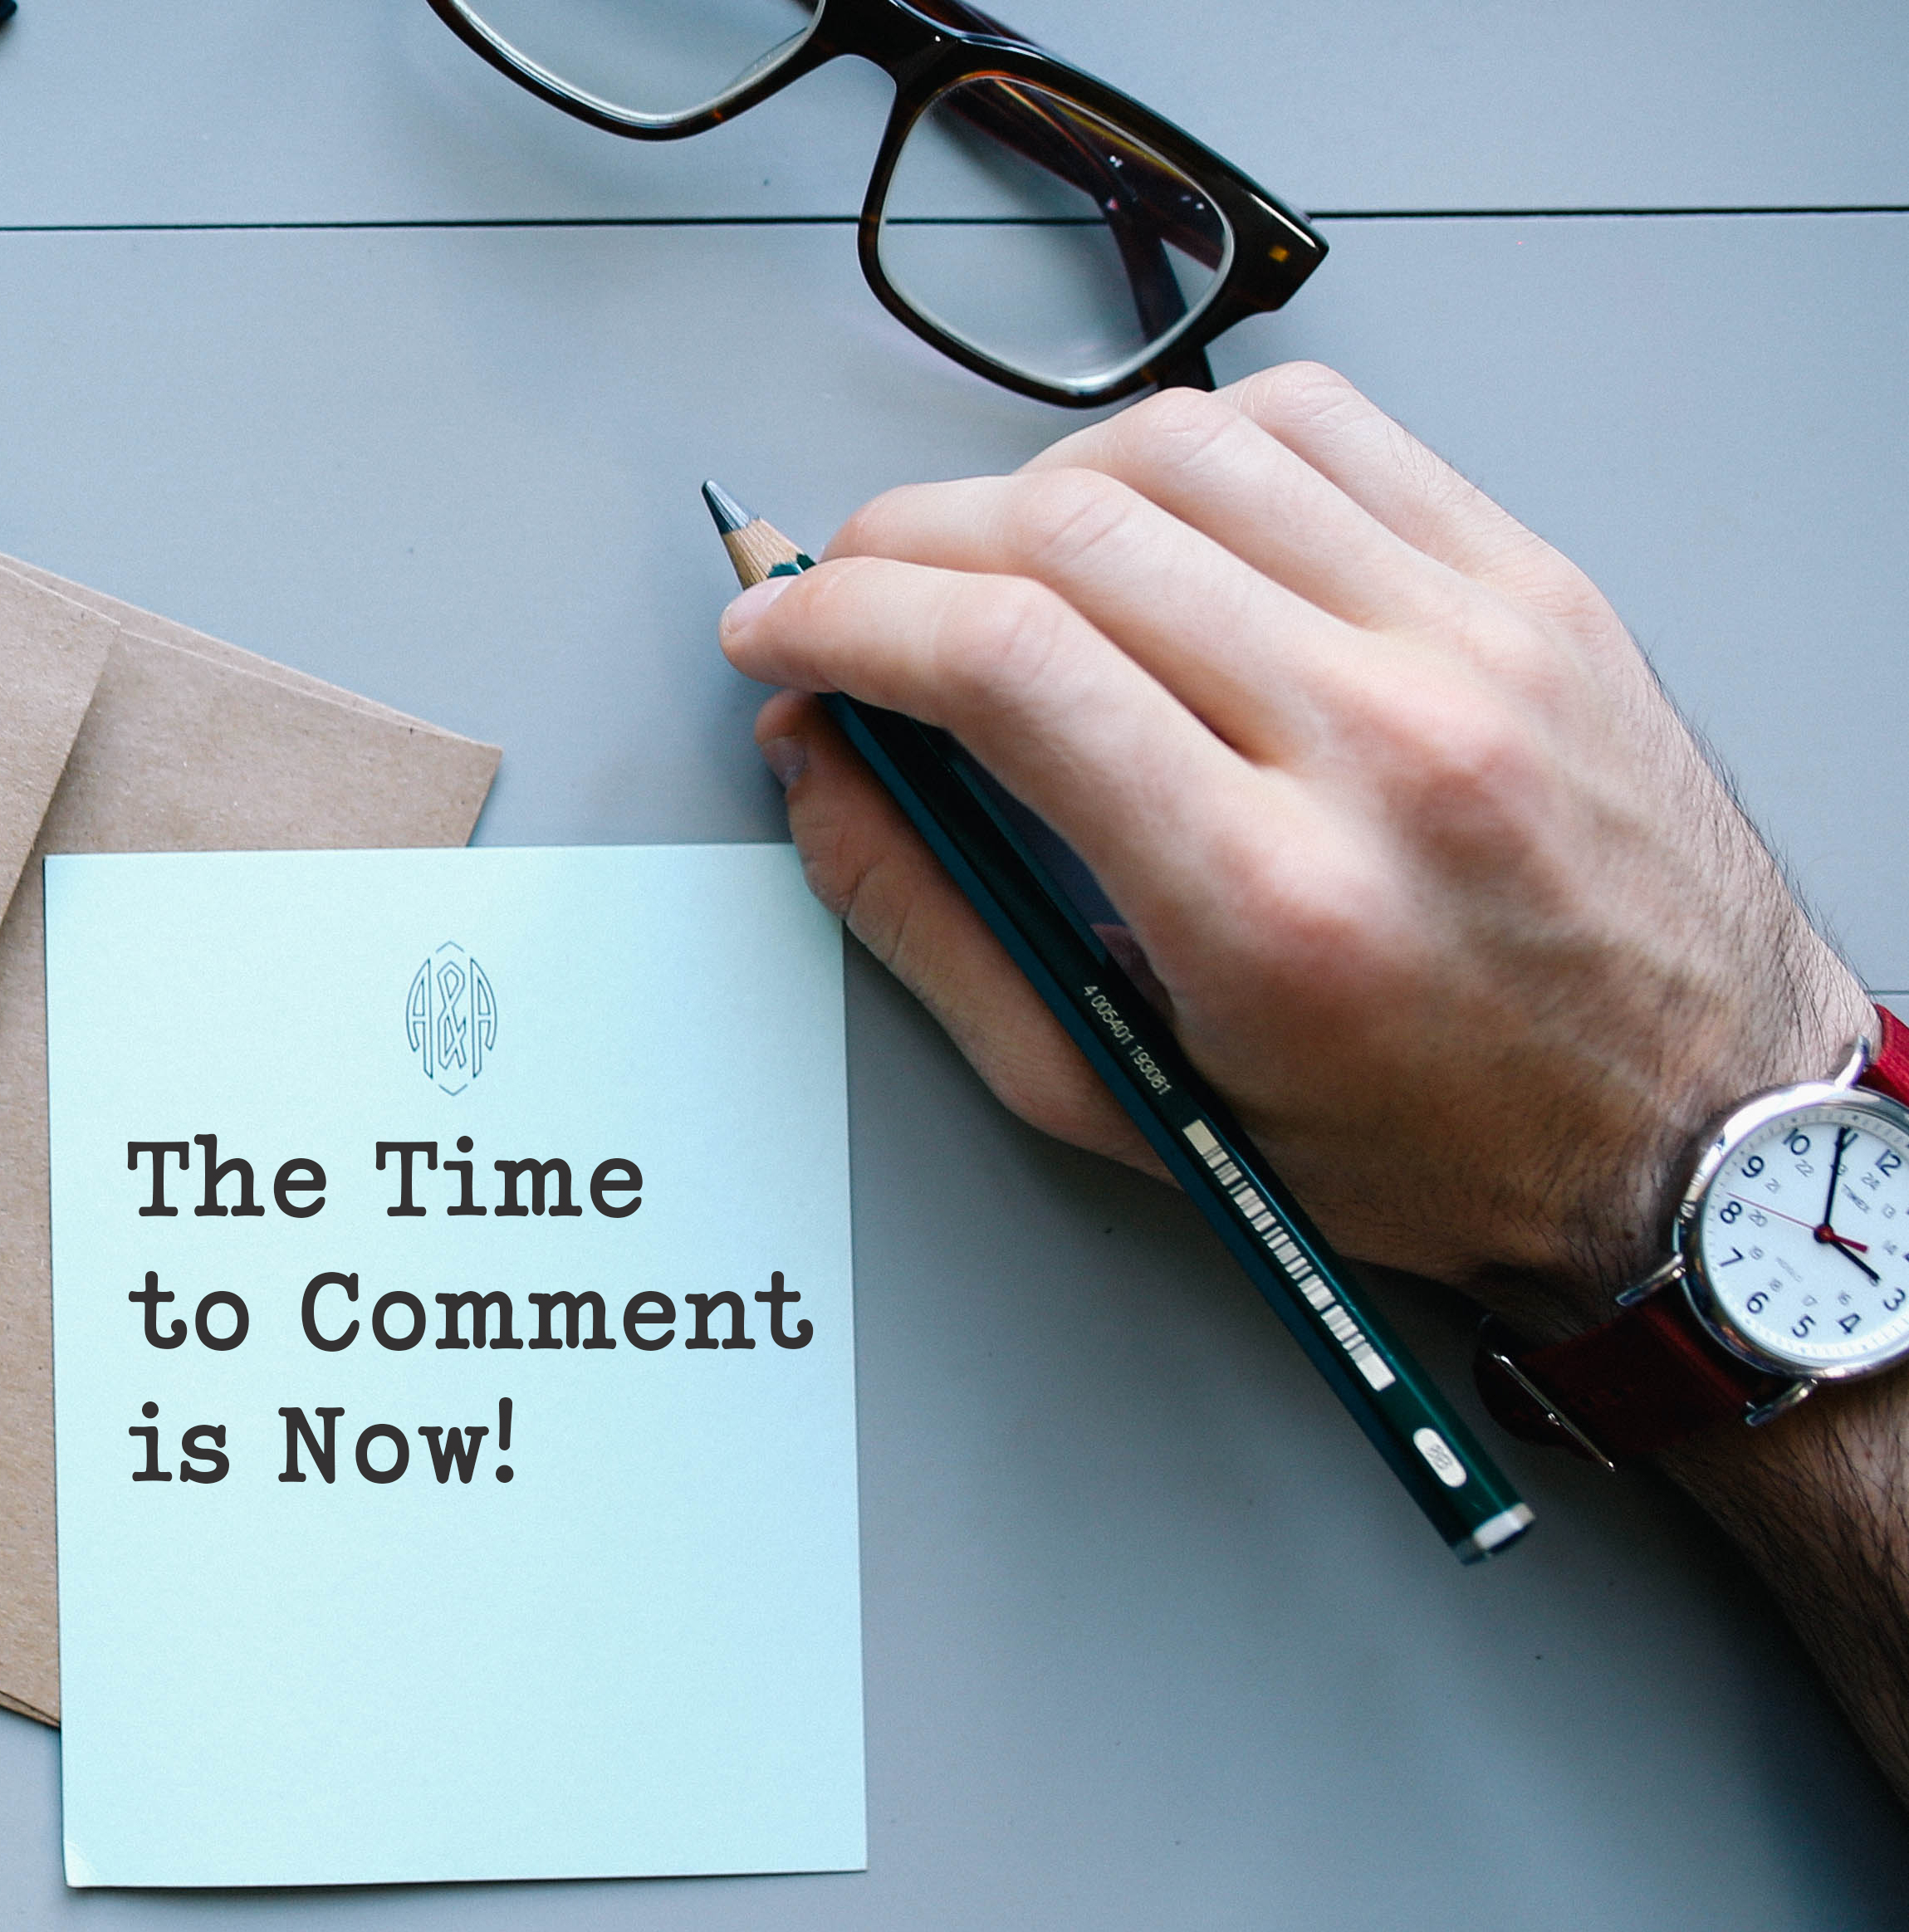 Picture of a hand with a watch and a pen. The words "The Time to Comment is Now" appears on a letter presumably being written by the person in the photo.